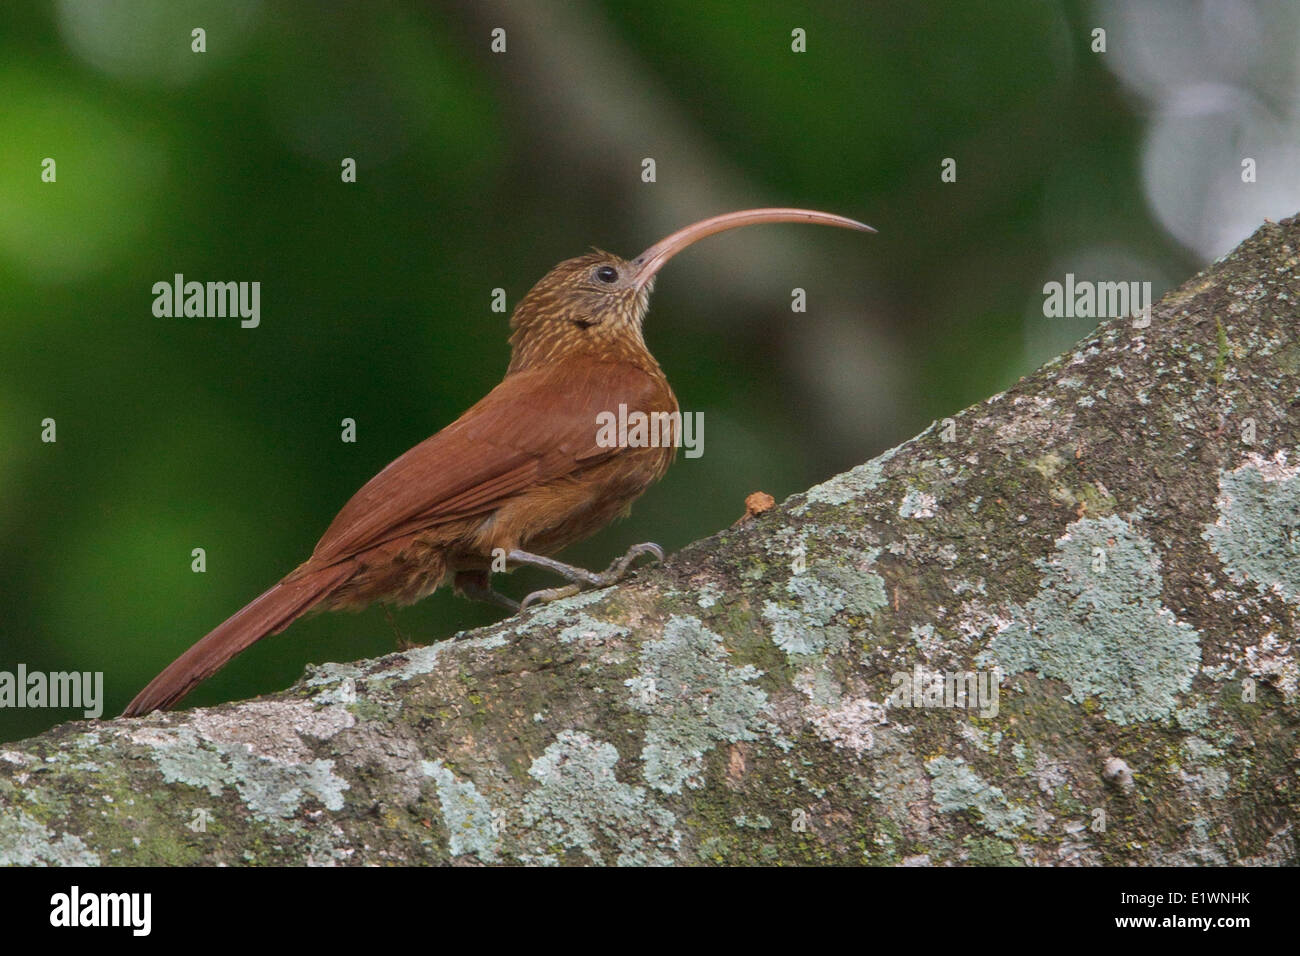 Red-billed Scythebill (Campylorhamphus trochilirostris) perched on a branch in Bolivia, South America. Stock Photo